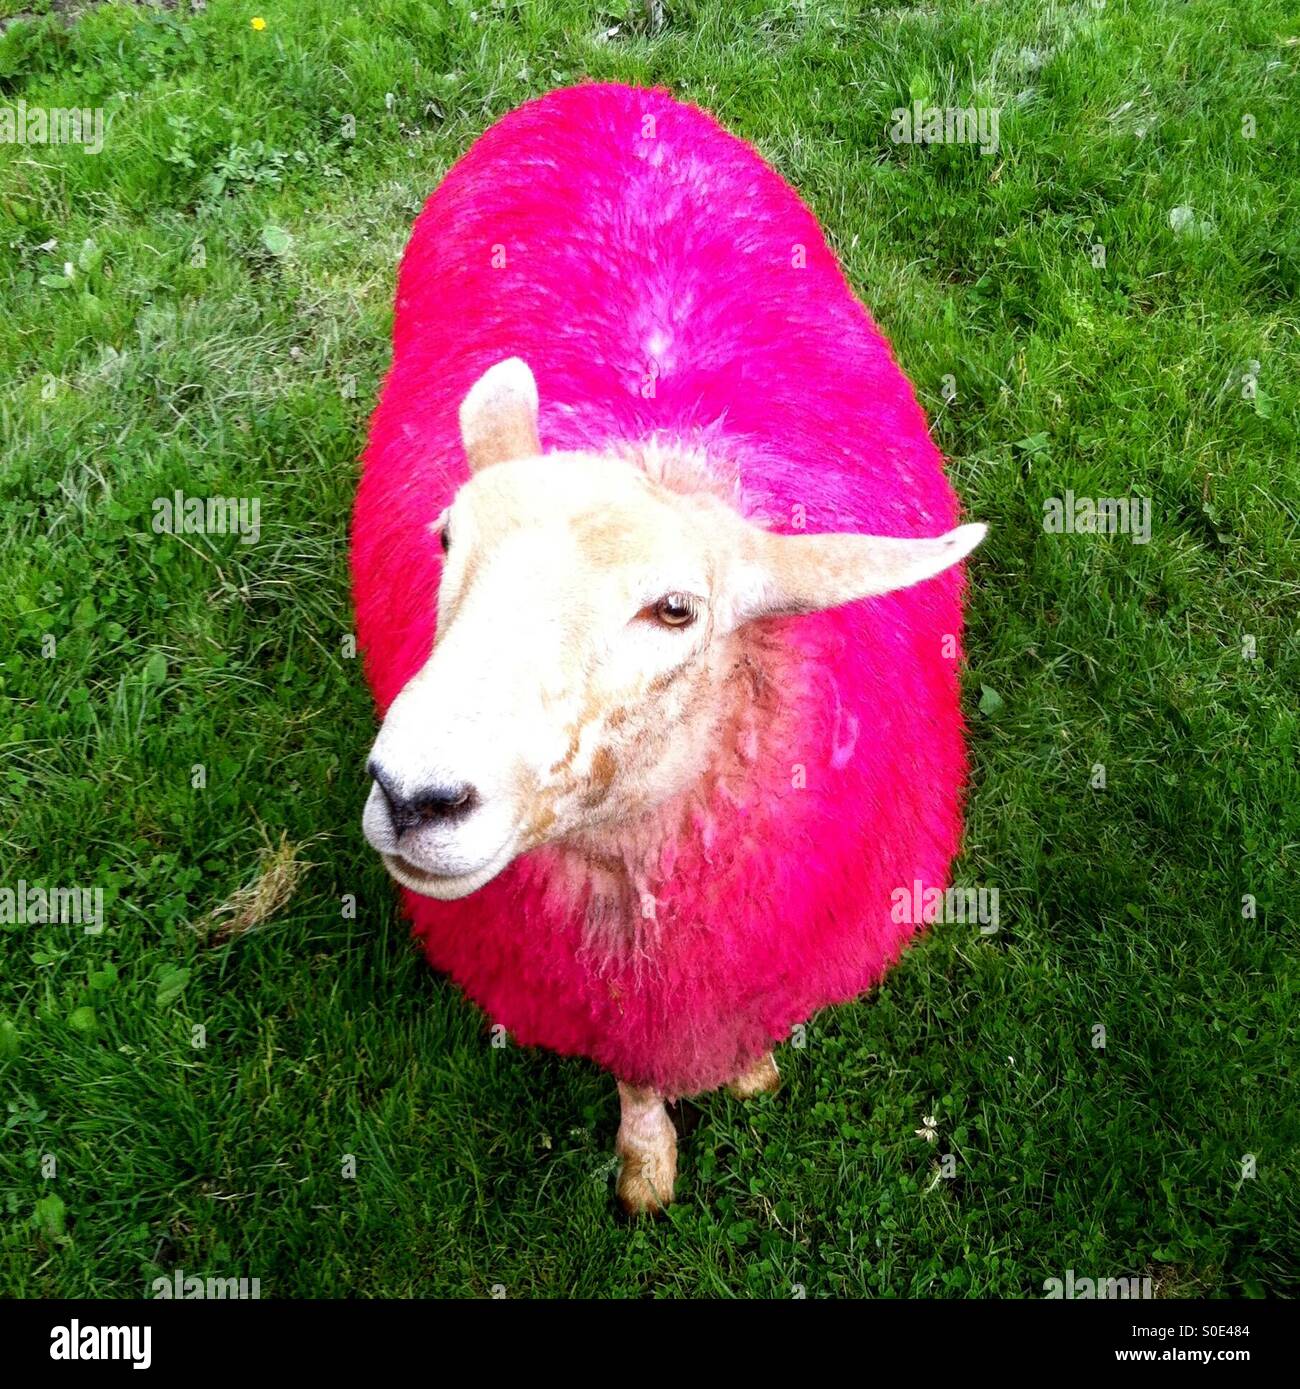 Regina, the pink sheep, greets you with a warm smile Stock Photo